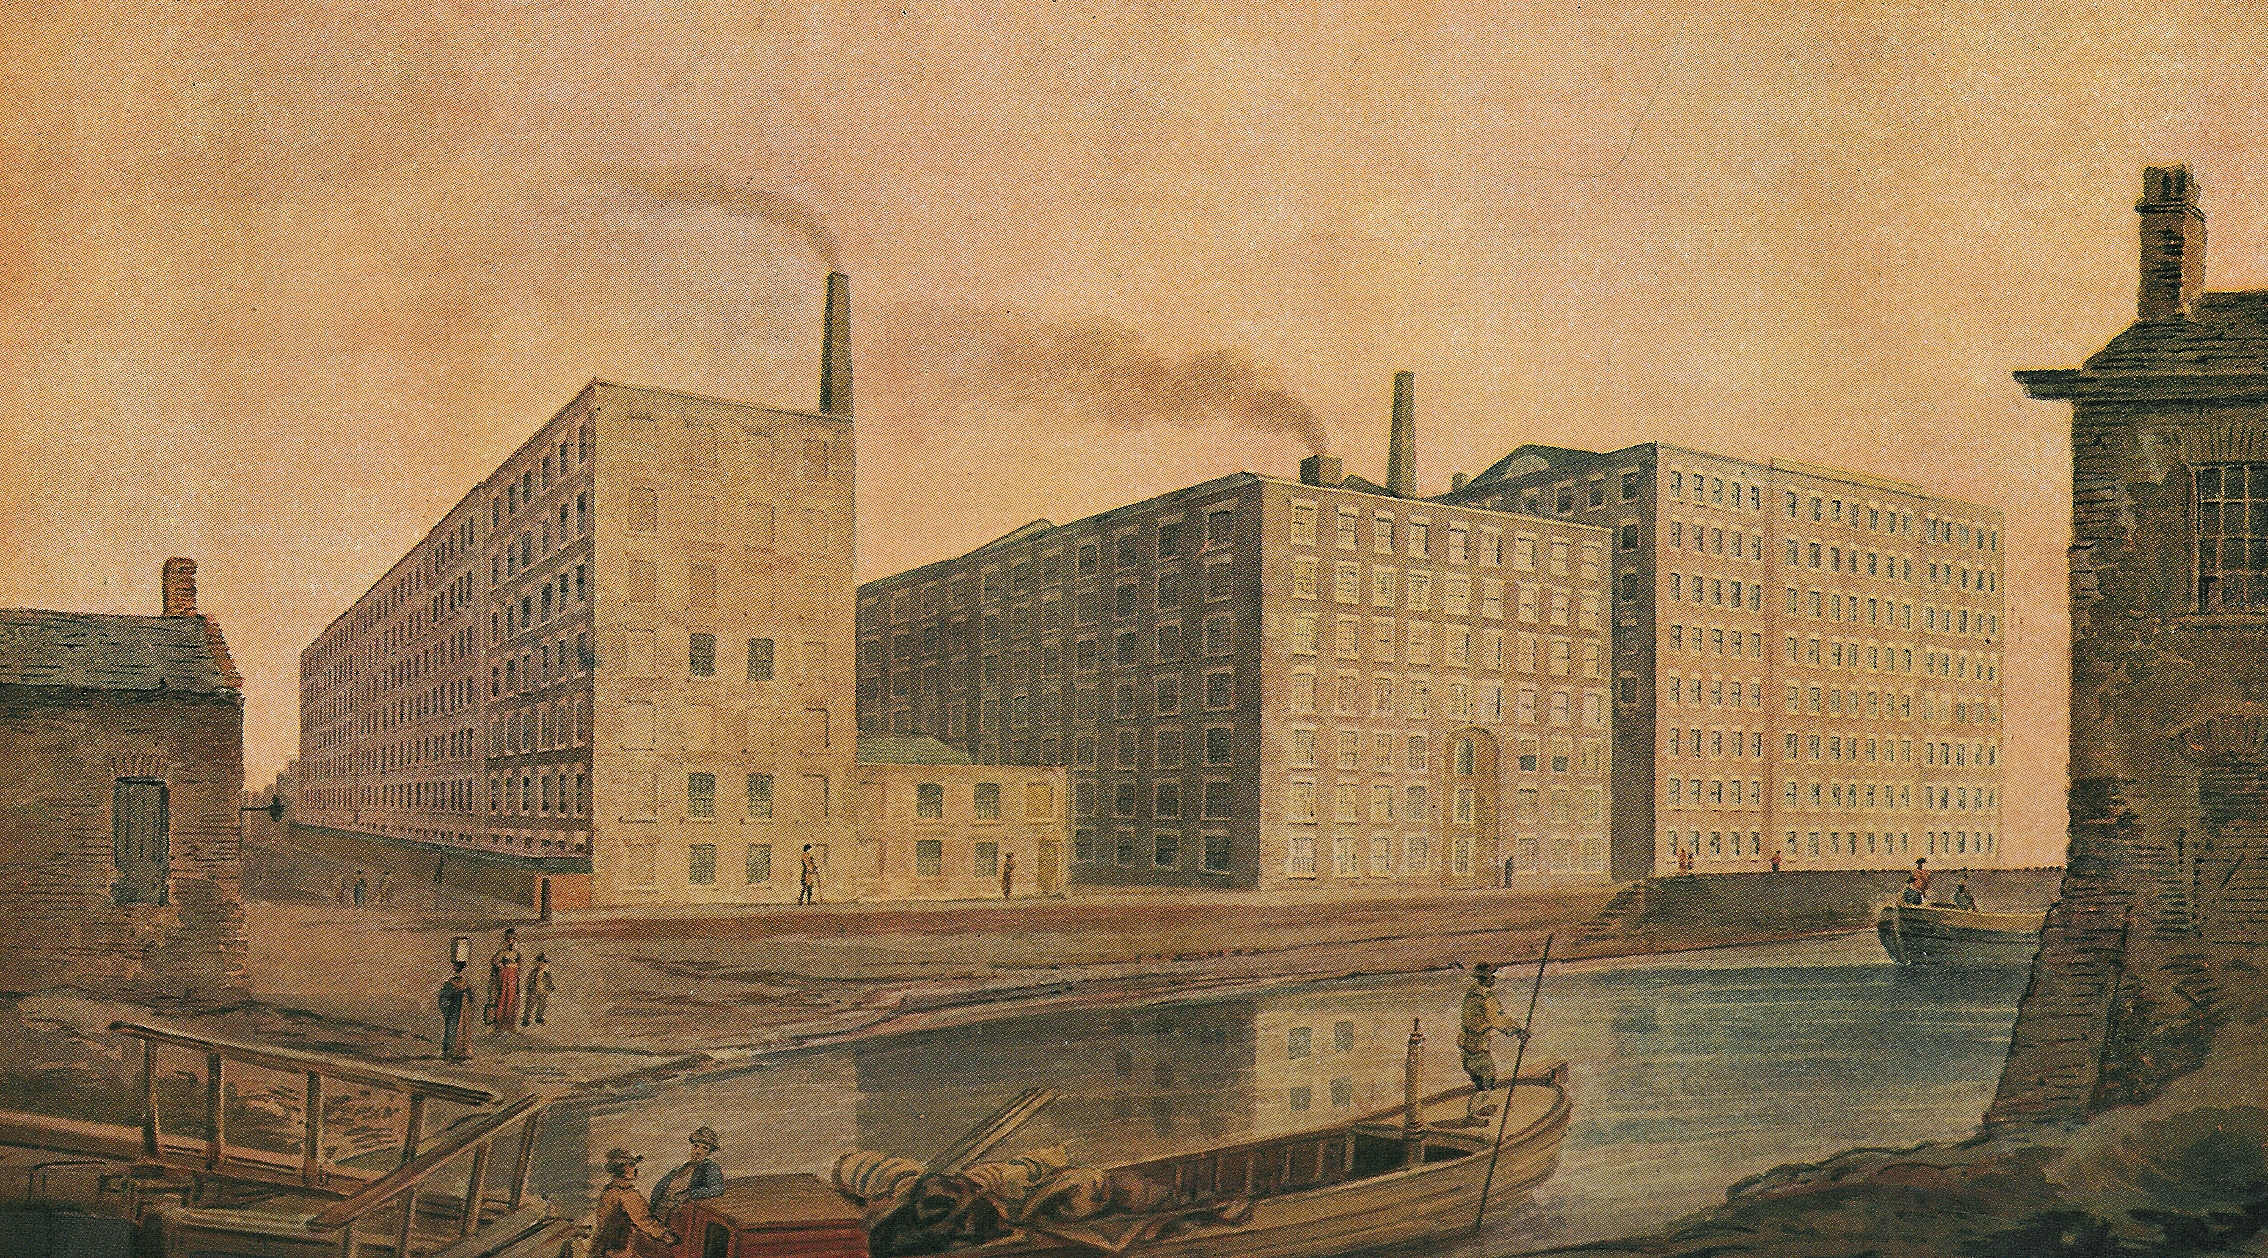 Manchester Cotton Mill in 1820 image - Free stock photo - Public Domain ...